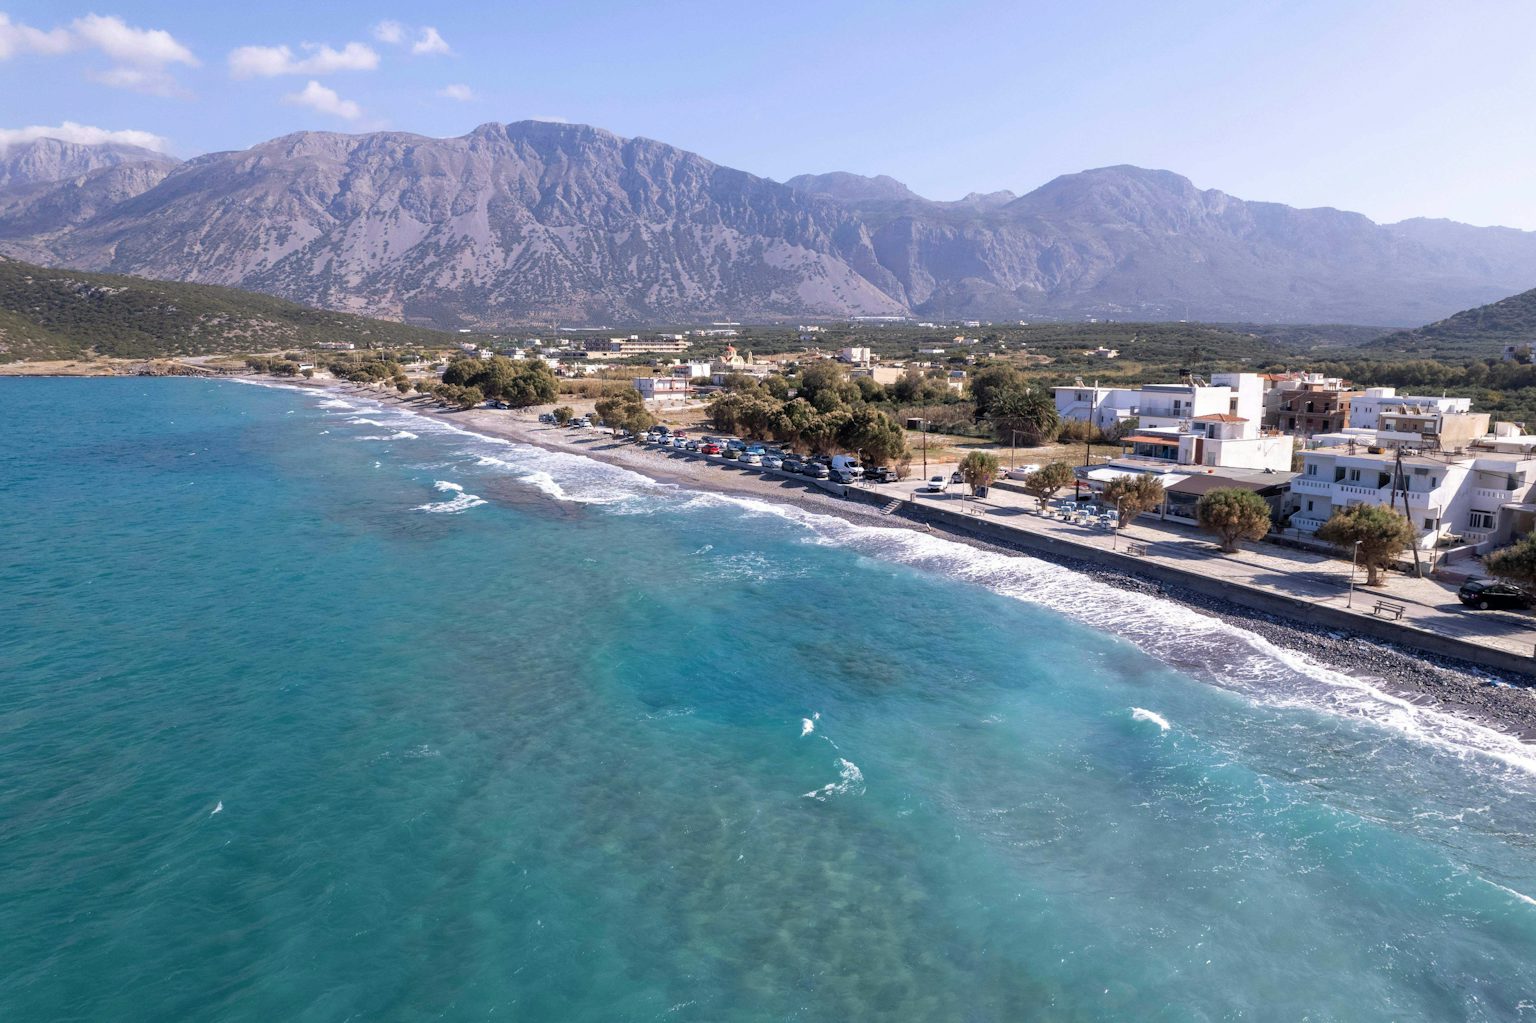 Pachia Ammos in Ierapetra: Diving into History